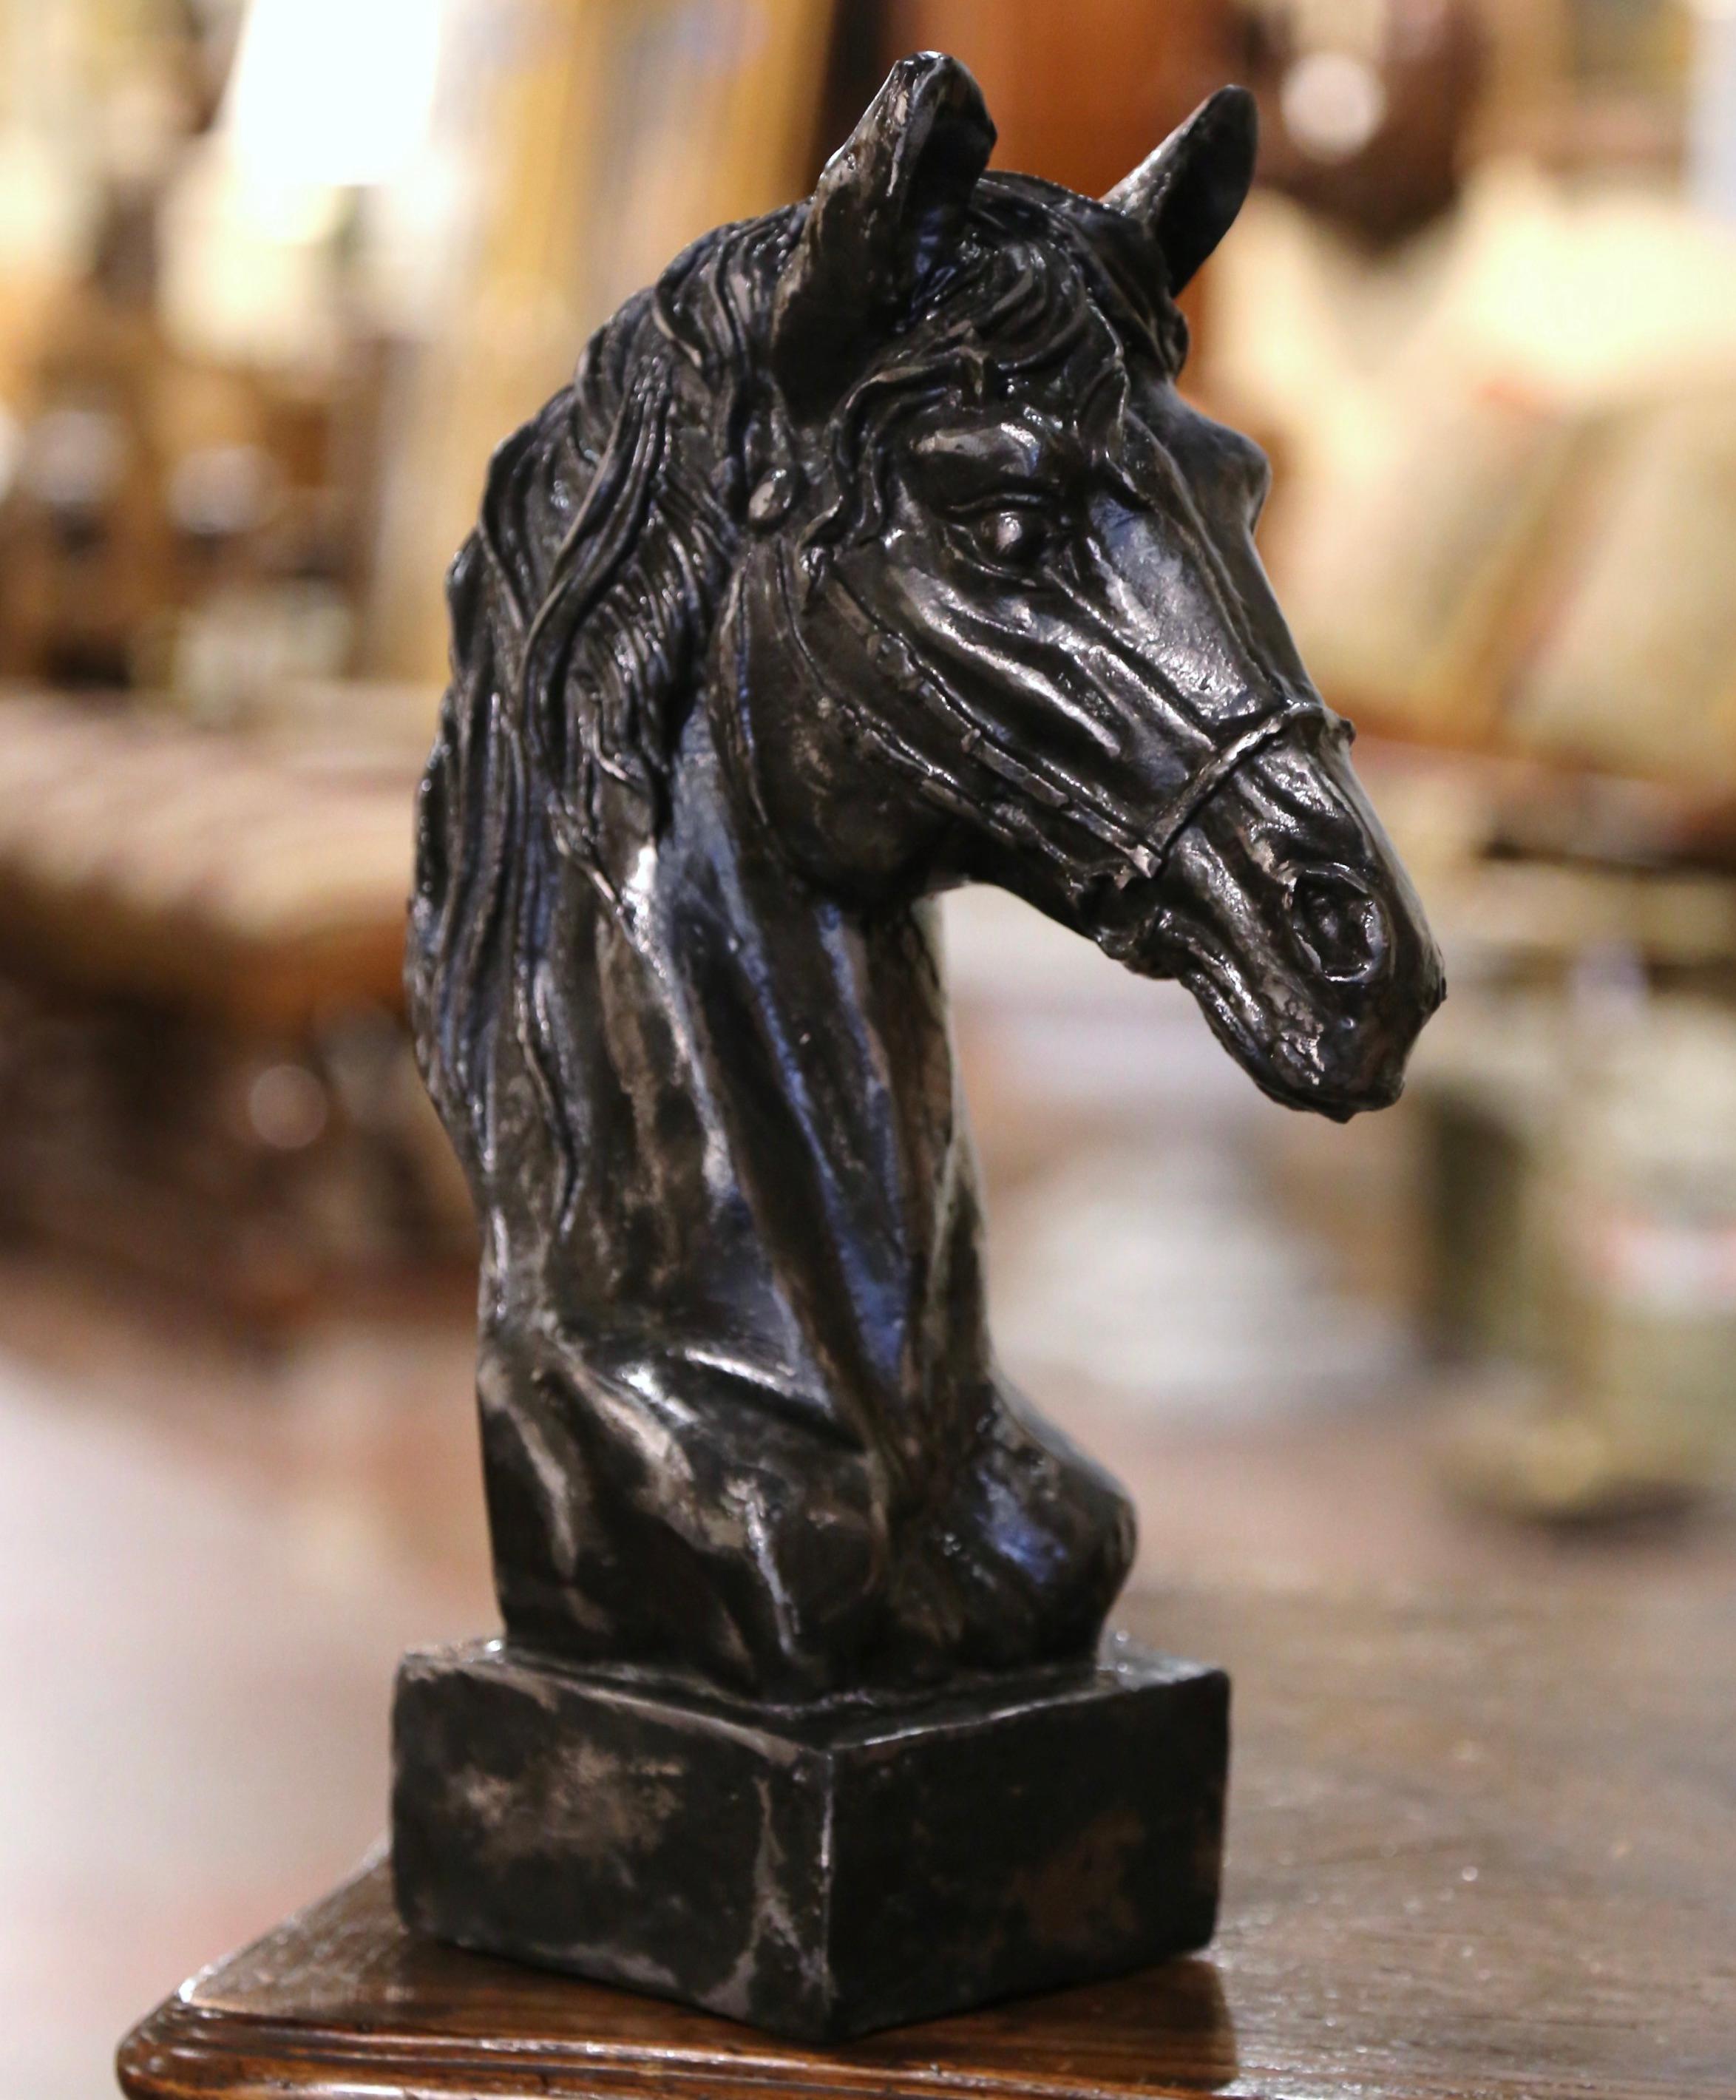 Decorate a study or office with this elegant antique sculpture. Crafted in France circa 1930, the piece depicts a horse head figure resting on integral square base. The tall decorative sculpture is in excellent condition and adorns a rich polished